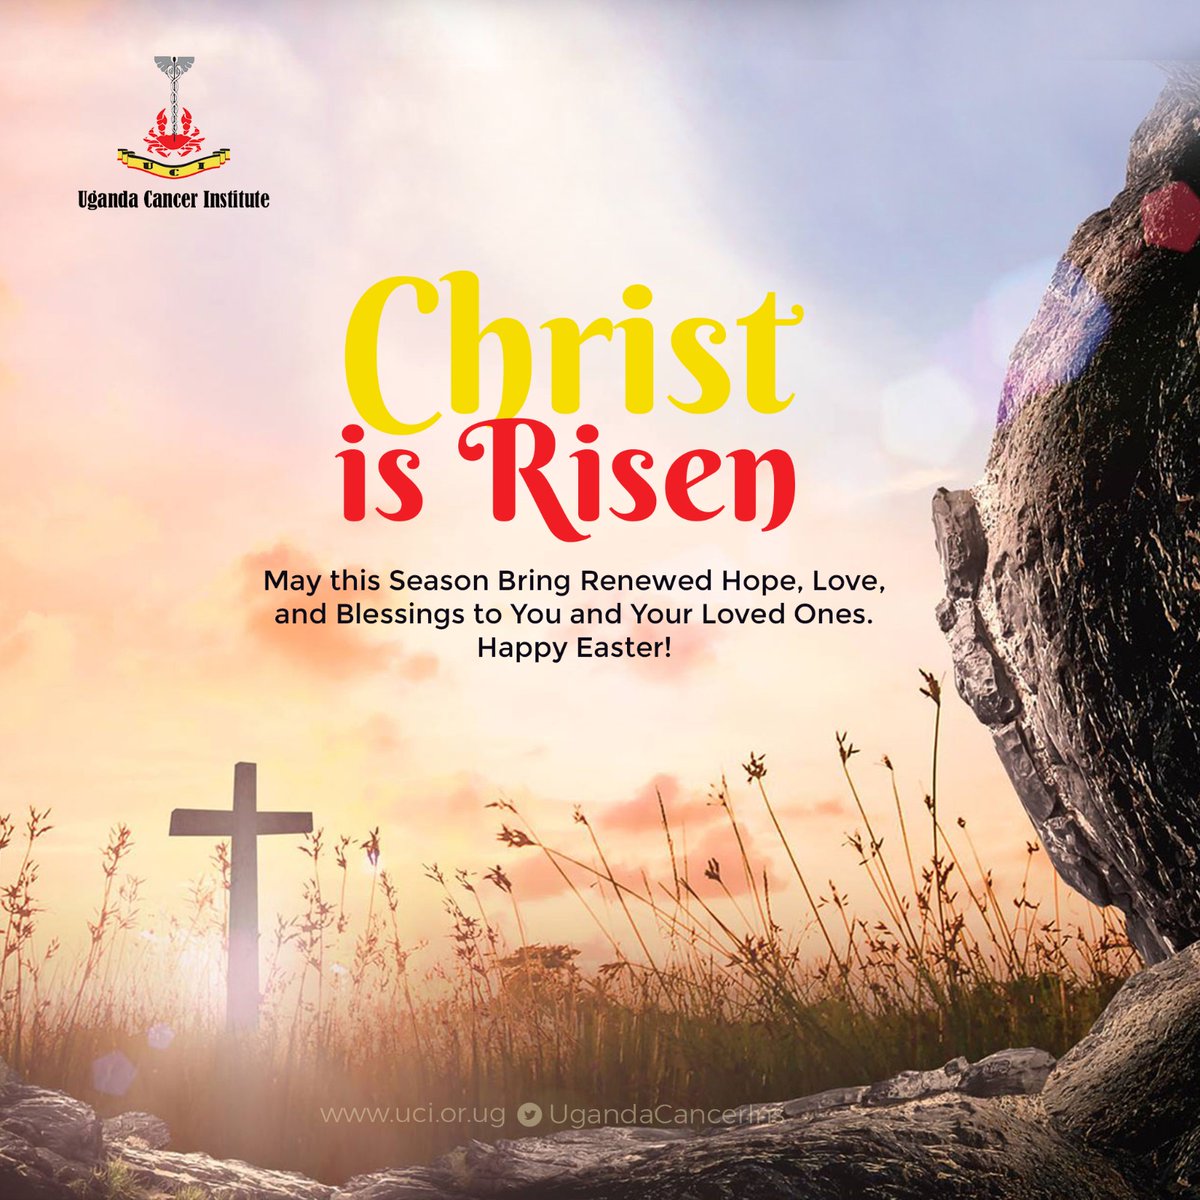 Happy Easter to us all. May the resurrection of Christ bring renewed hope and faith in healing/treatment. Remember, early detection + right treatment guarantees cure for cancer. # FightCancerUg